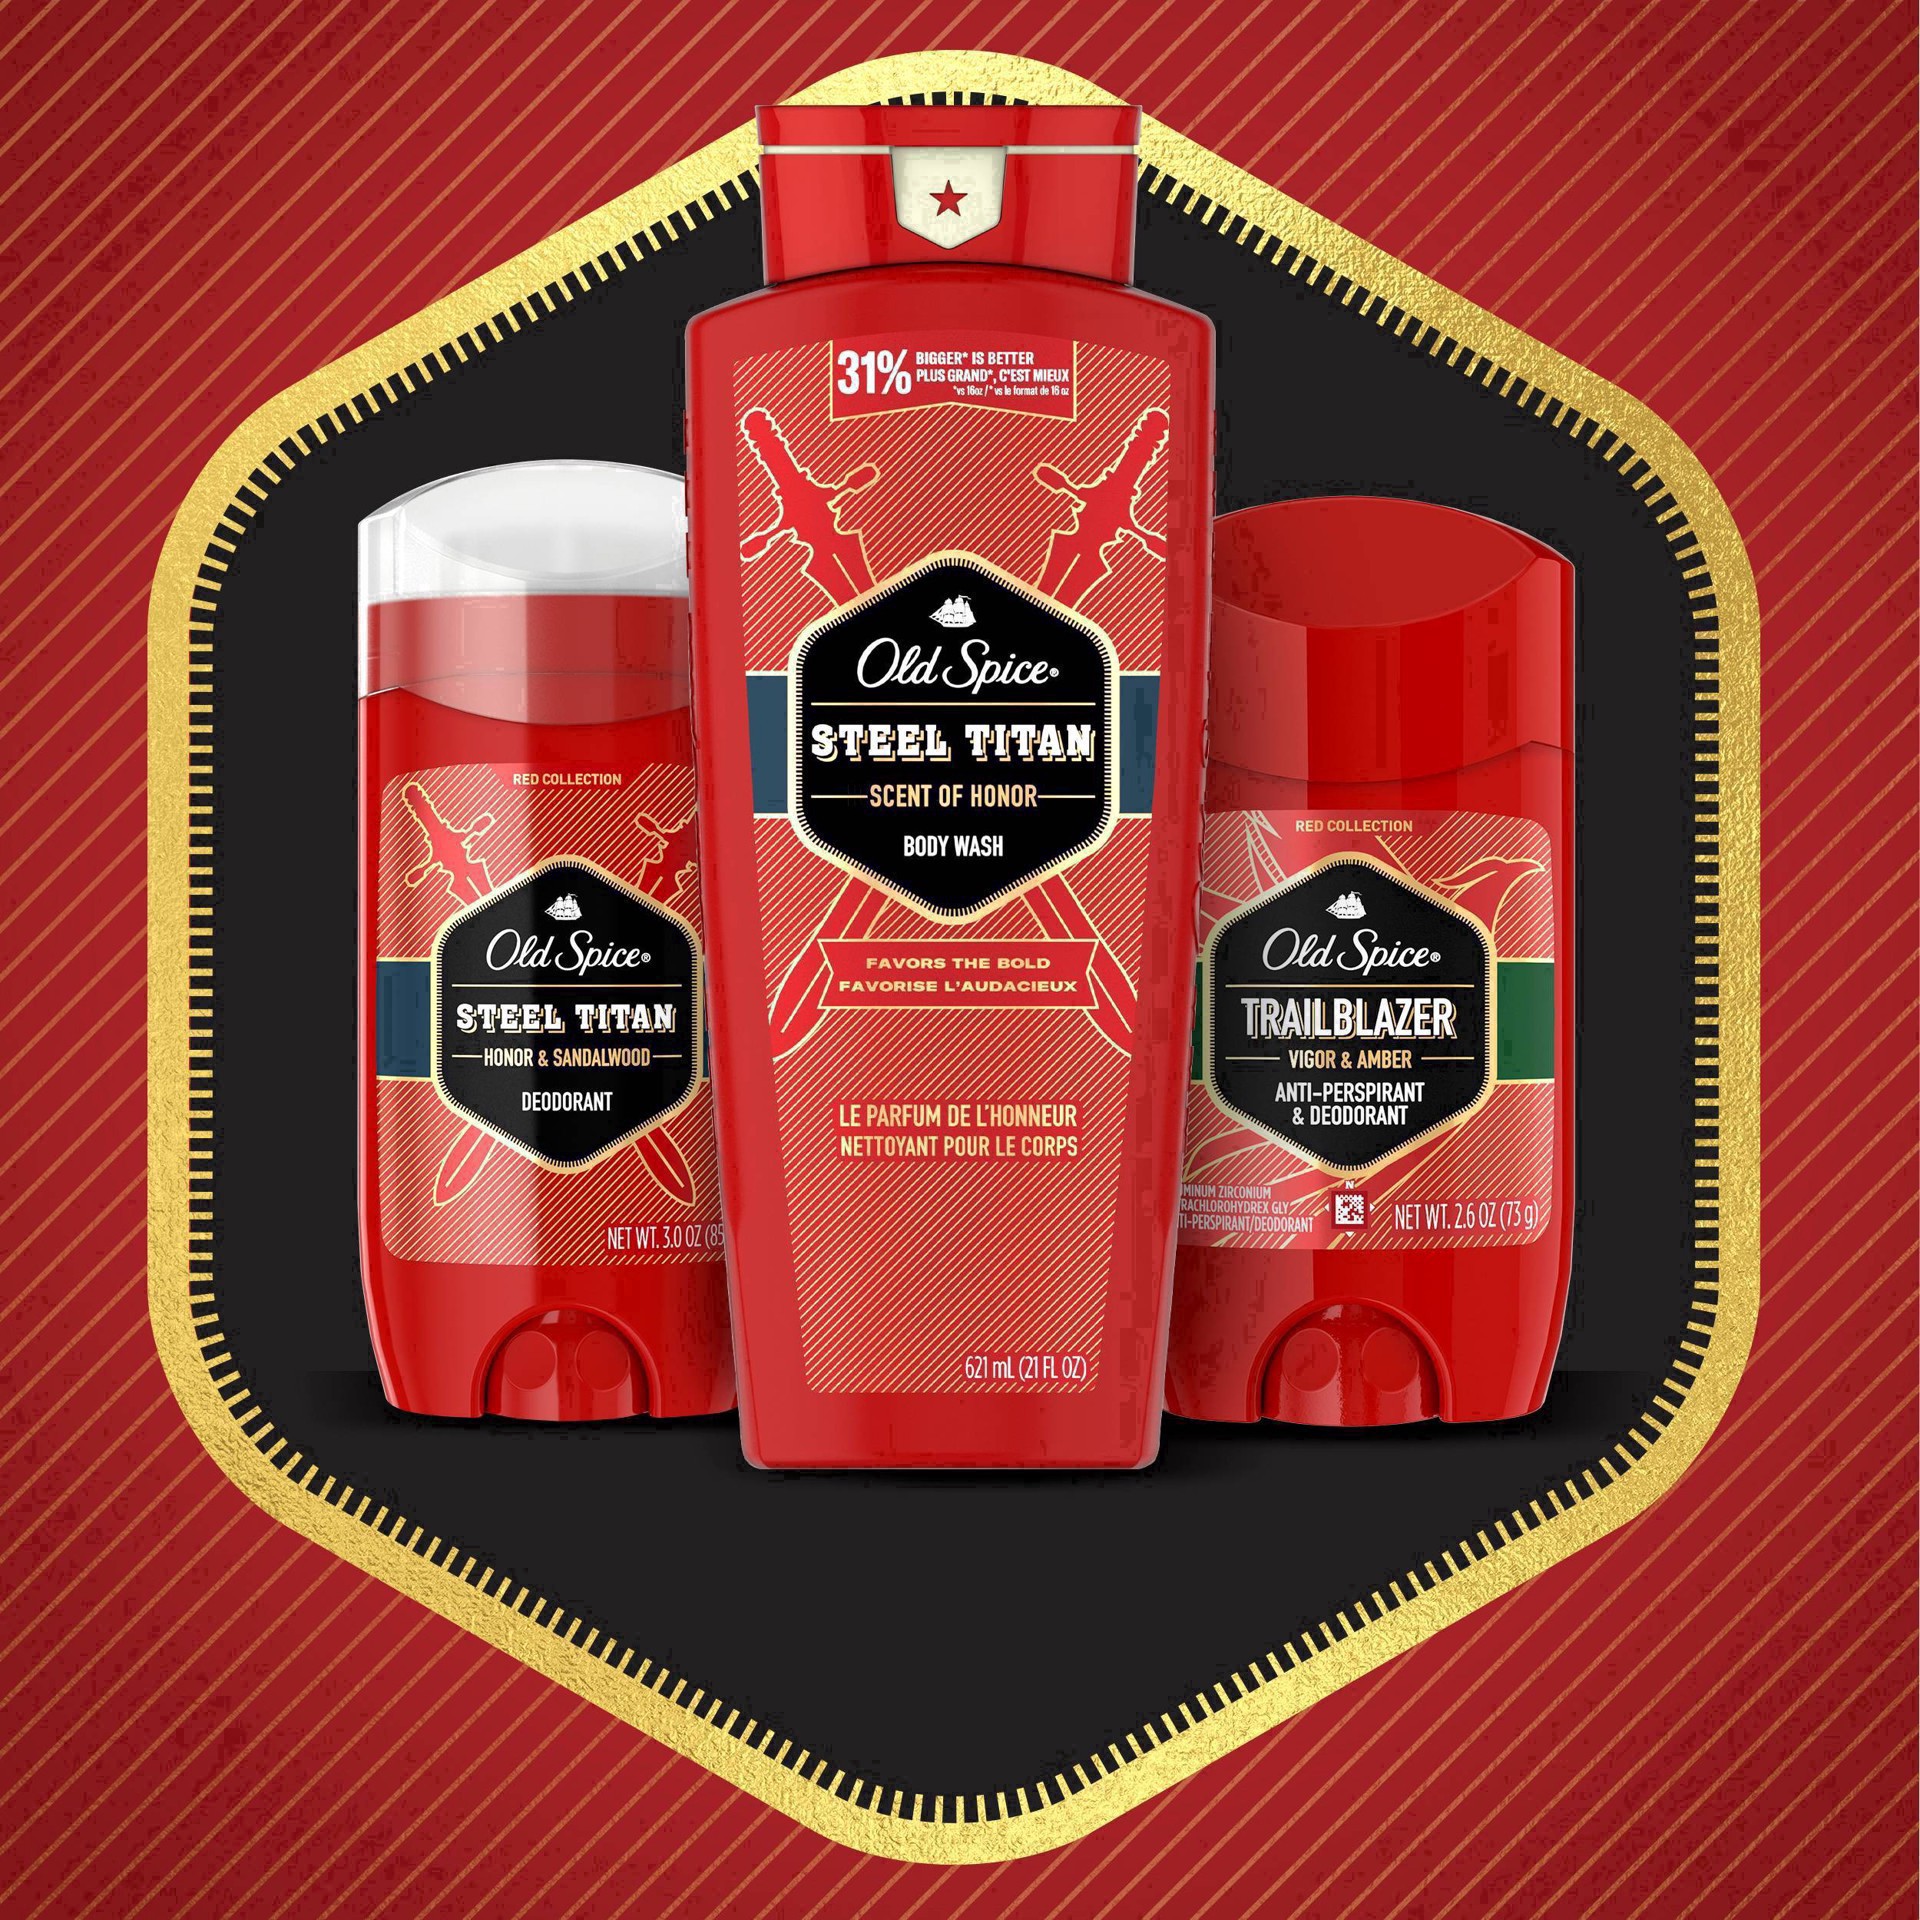 slide 26 of 95, Old Spice Red Collection Swagger Scent Deodorant for Men, Value Pack, 3.0 oz, Pack of 2, 2 ct; 3 oz